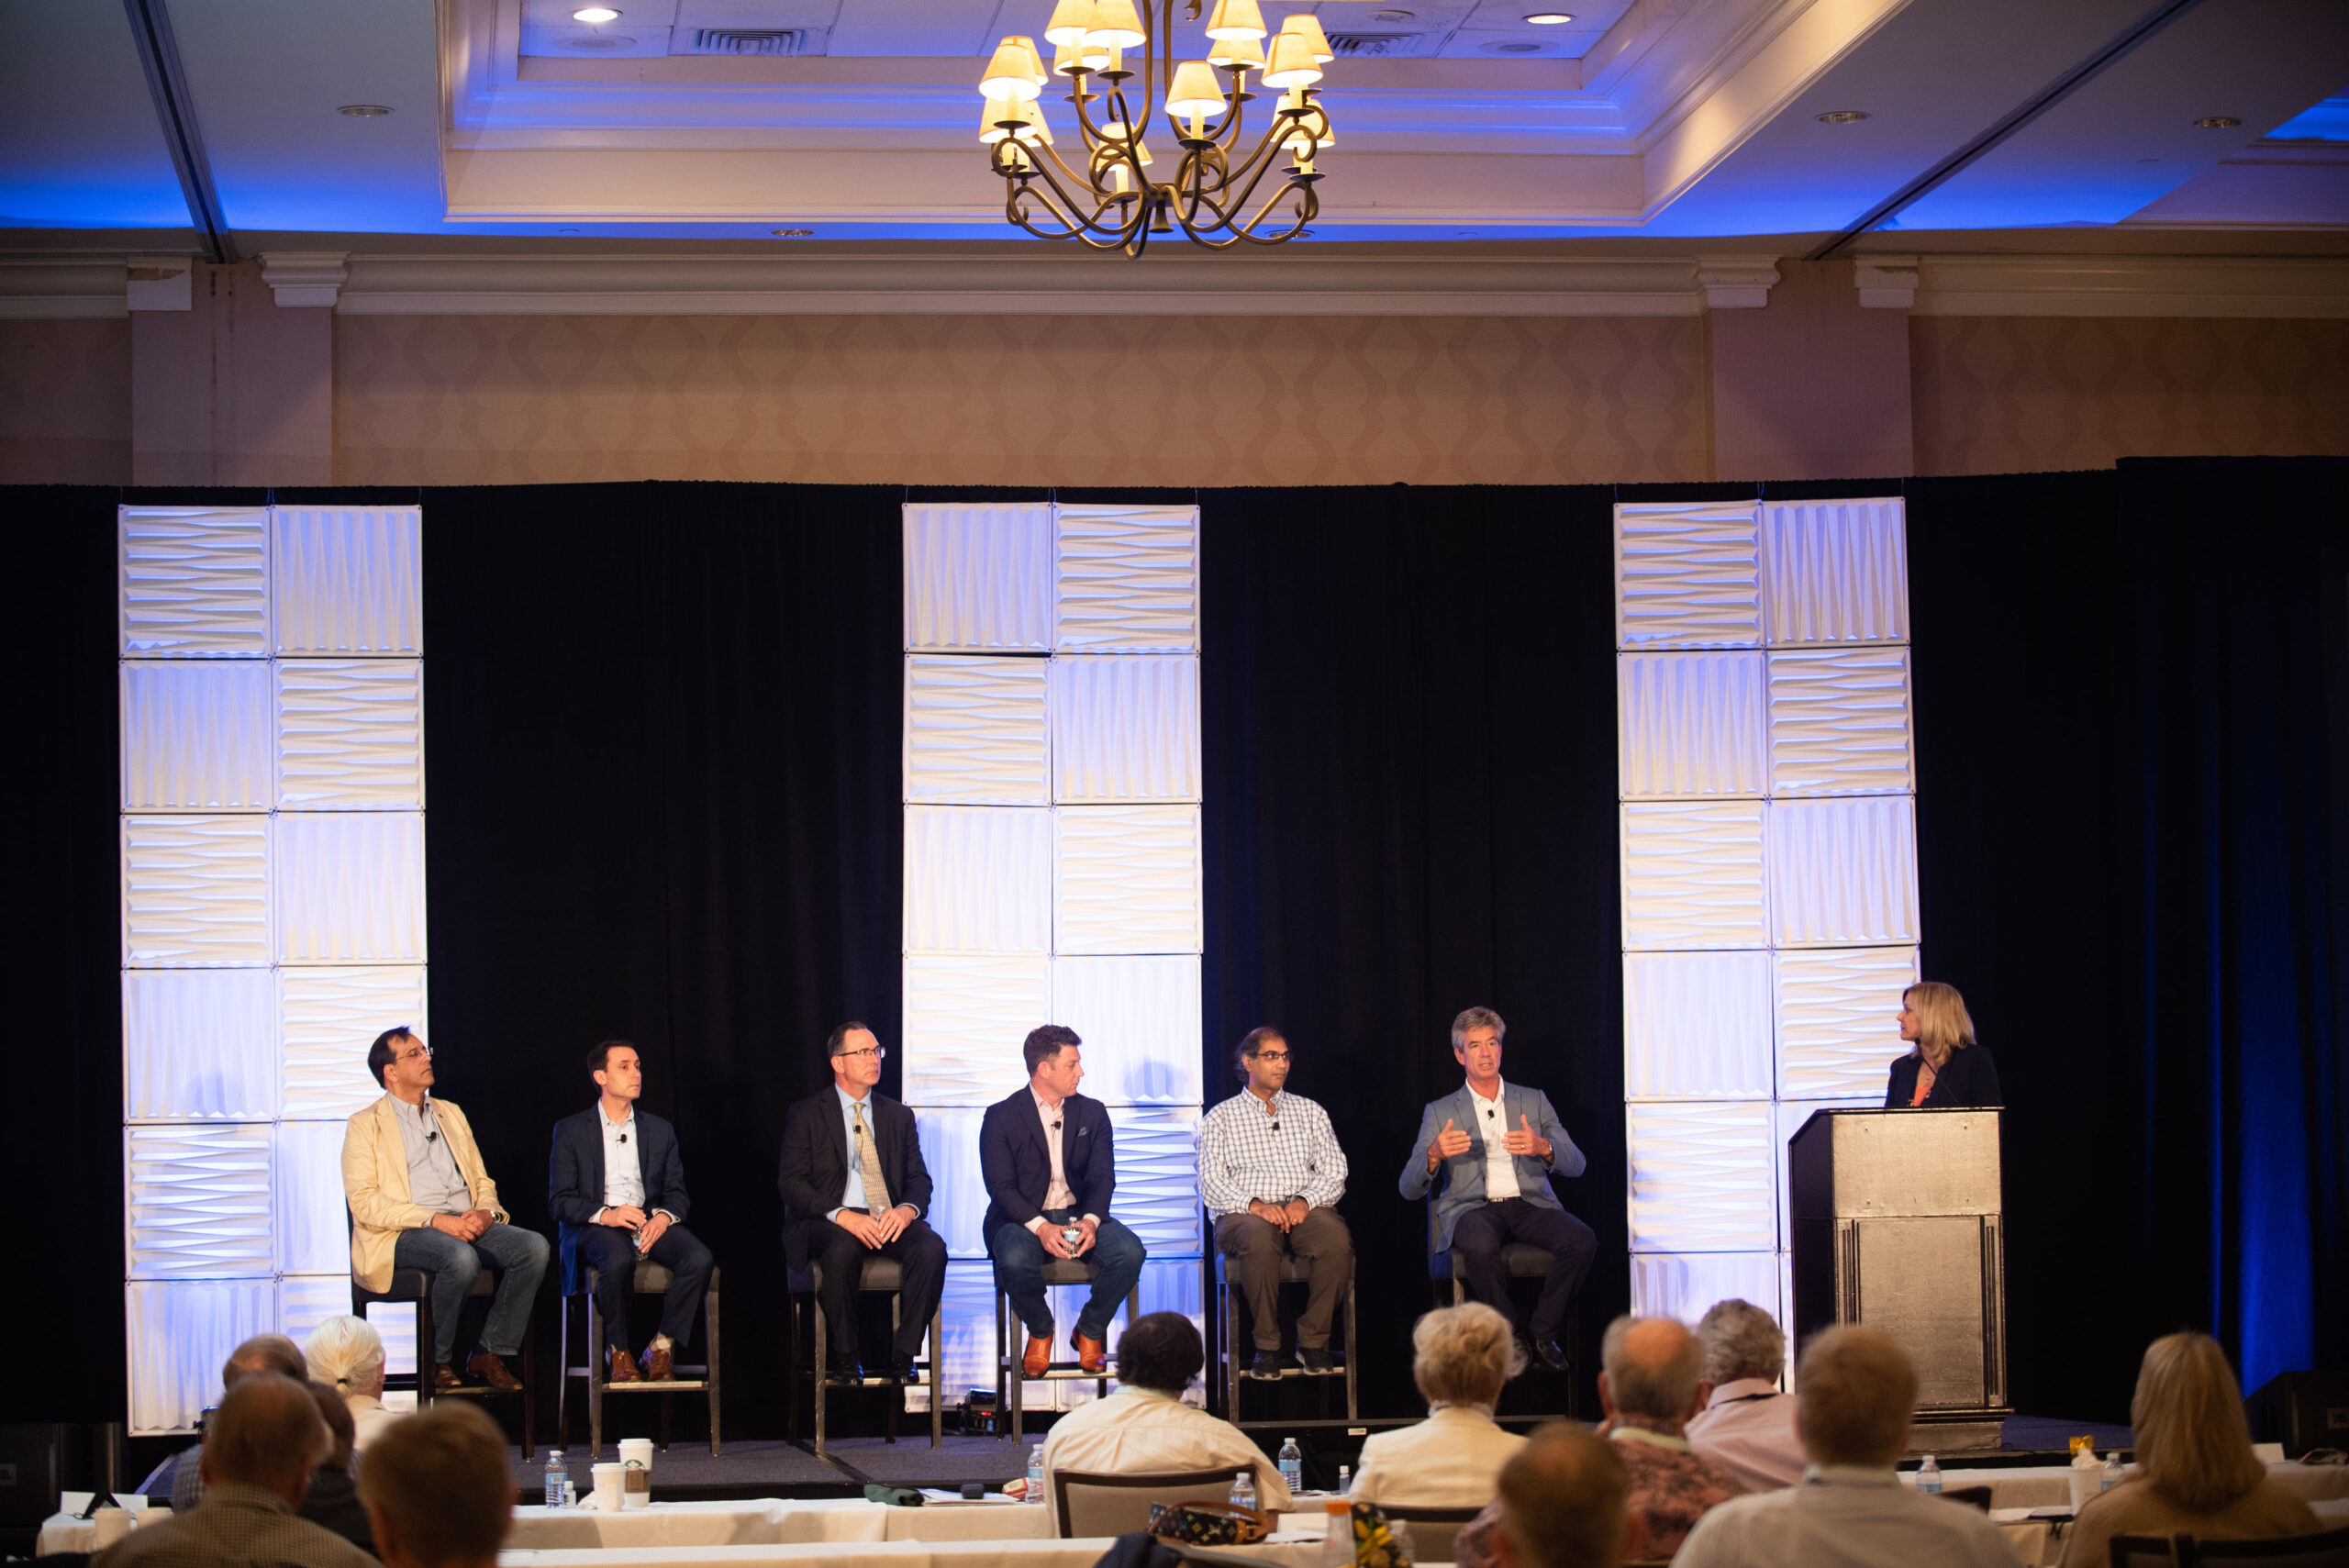 At the Investment U Conference 2021, a panel of investing experts discussed today's disruptive technologies.